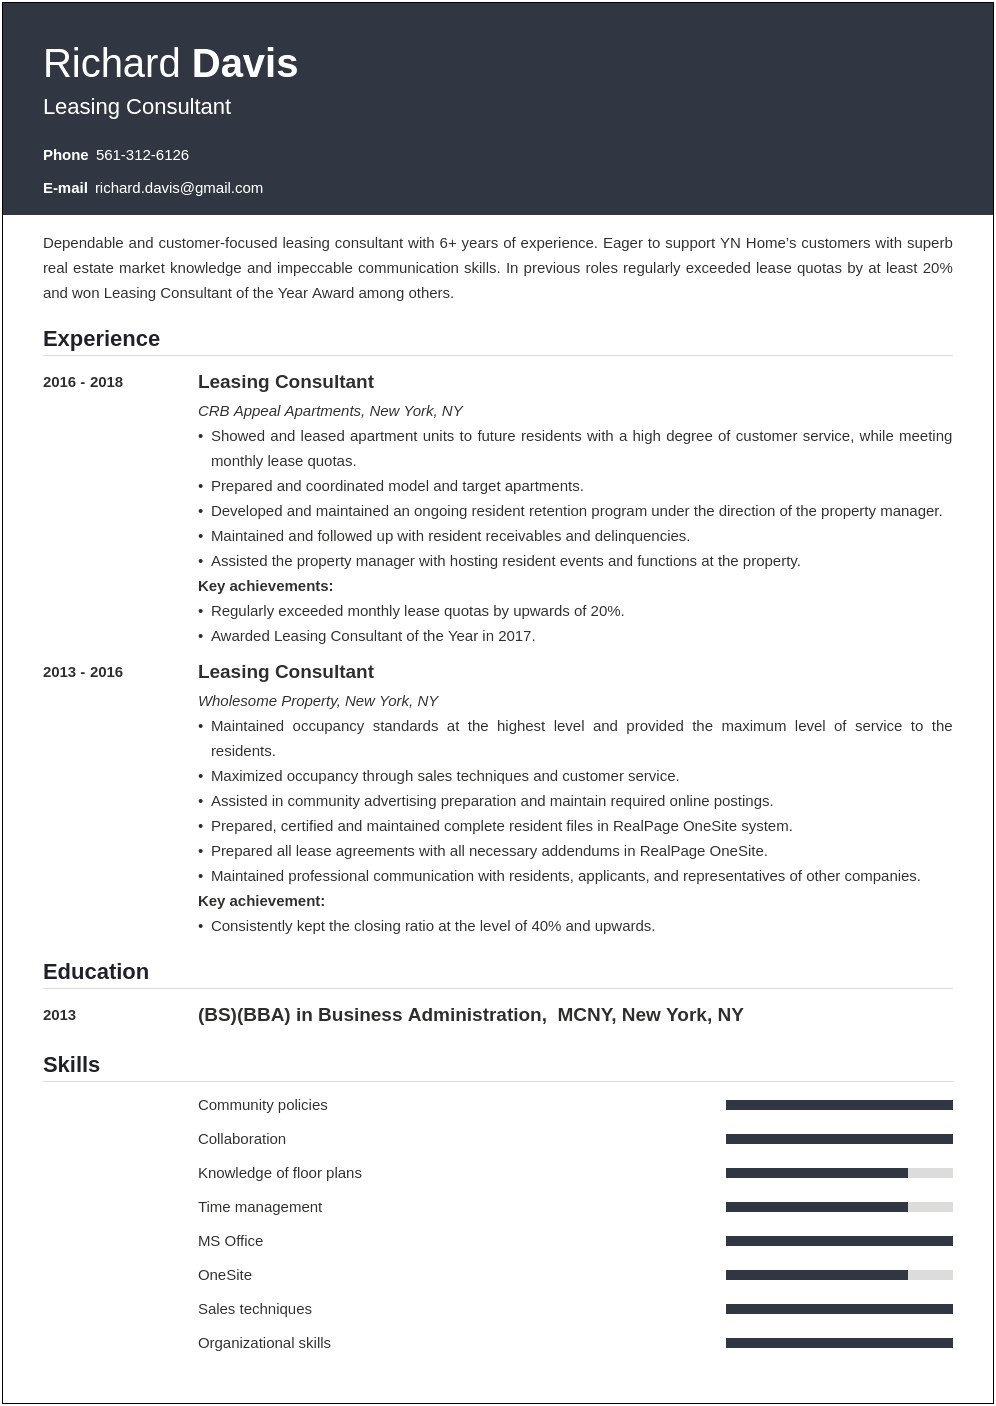 Leasing Consultant Resume Objective Examples